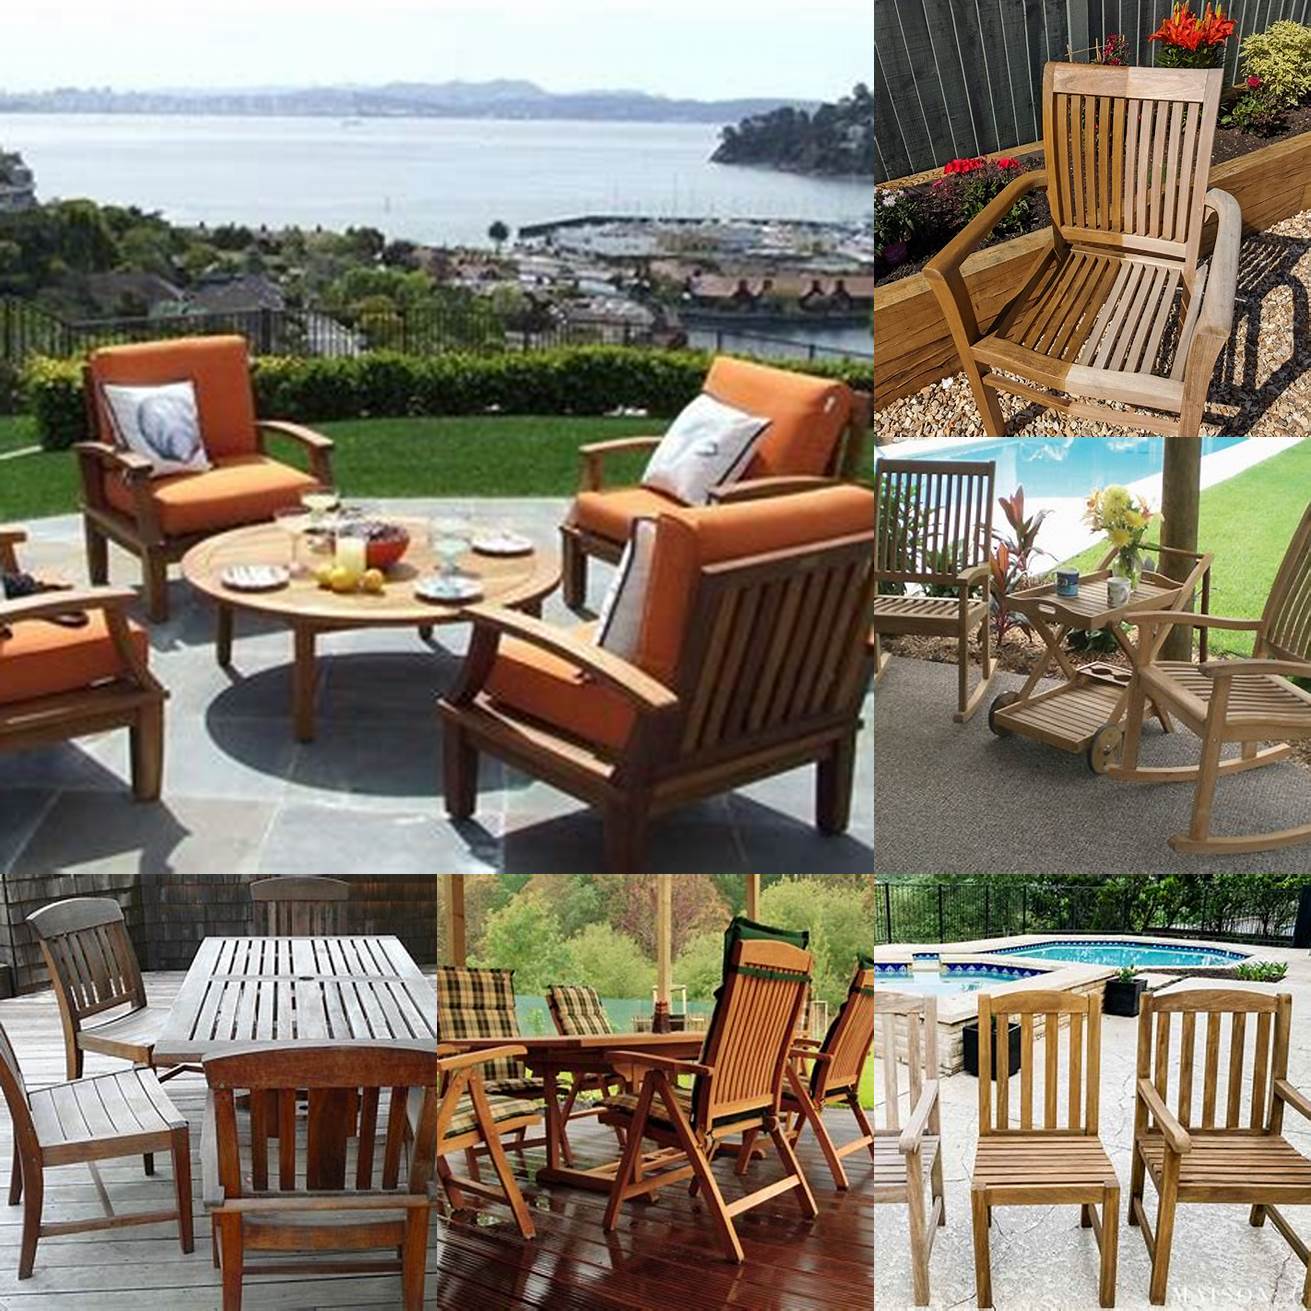 Protecting Teak Furniture from the Sun